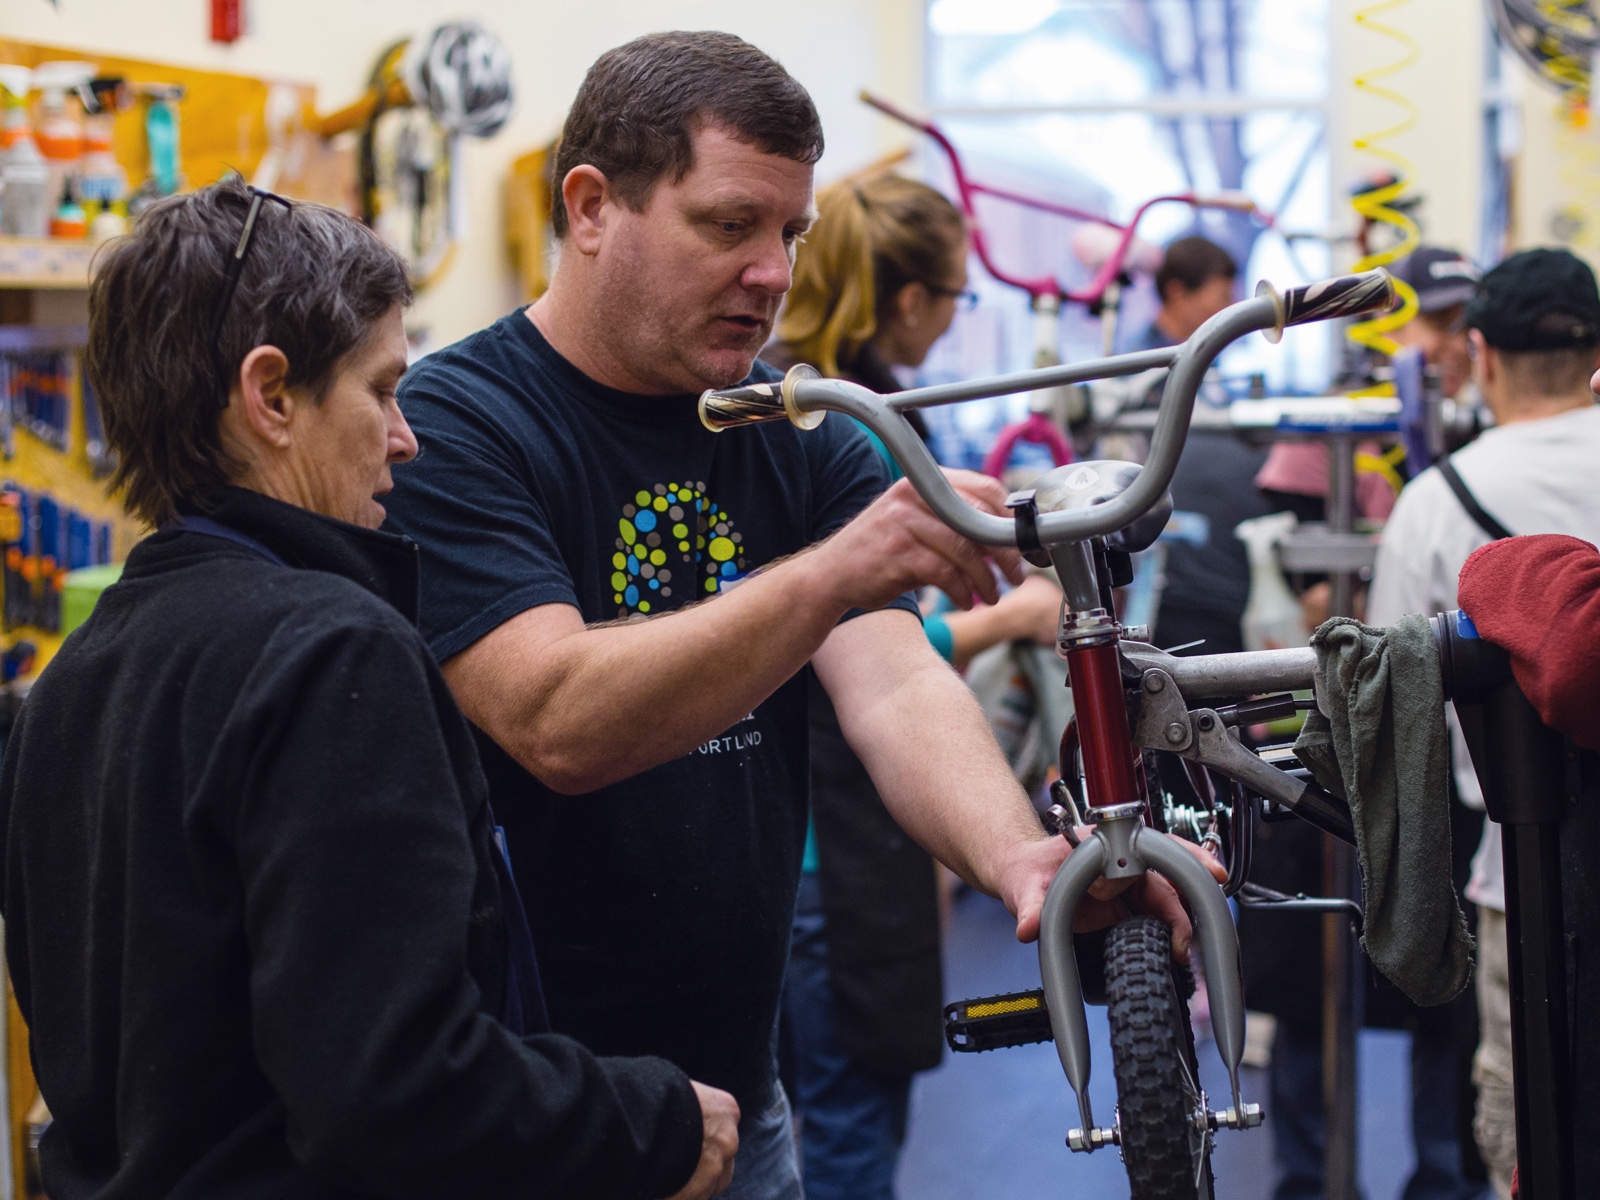 Larry and other volunteers fixing kids’ bikes in a bike shop